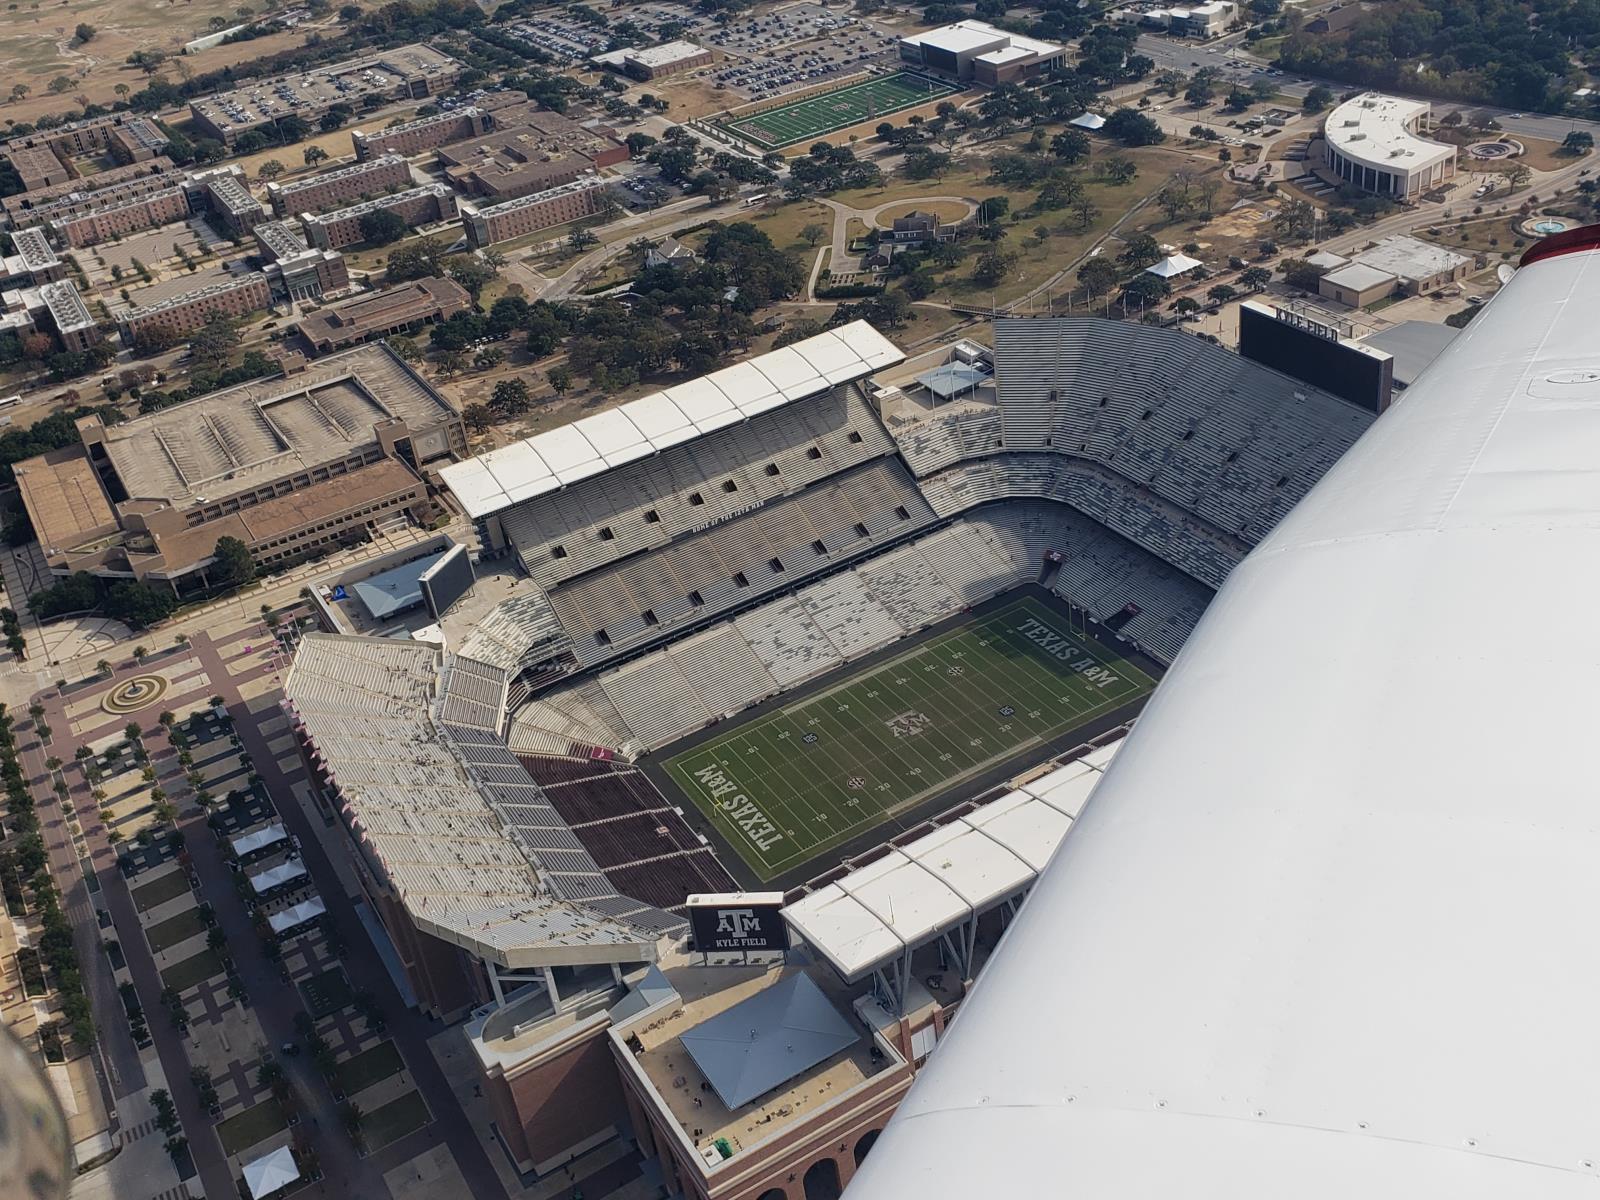 Overflying Kyle Field - home of the Fightin' Texas Aggie Band!